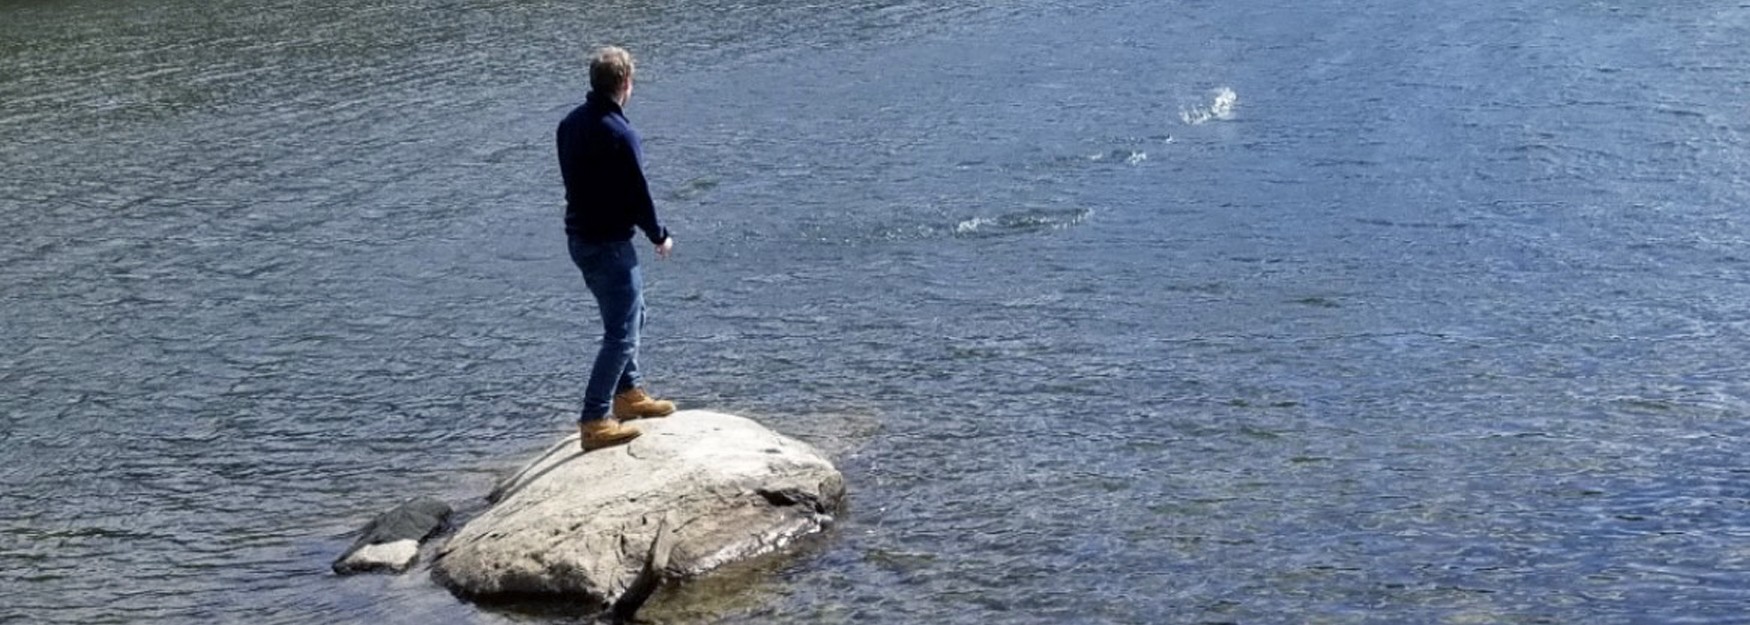 Luke Colomey stands on a rock in a body of water, his back facing the camera